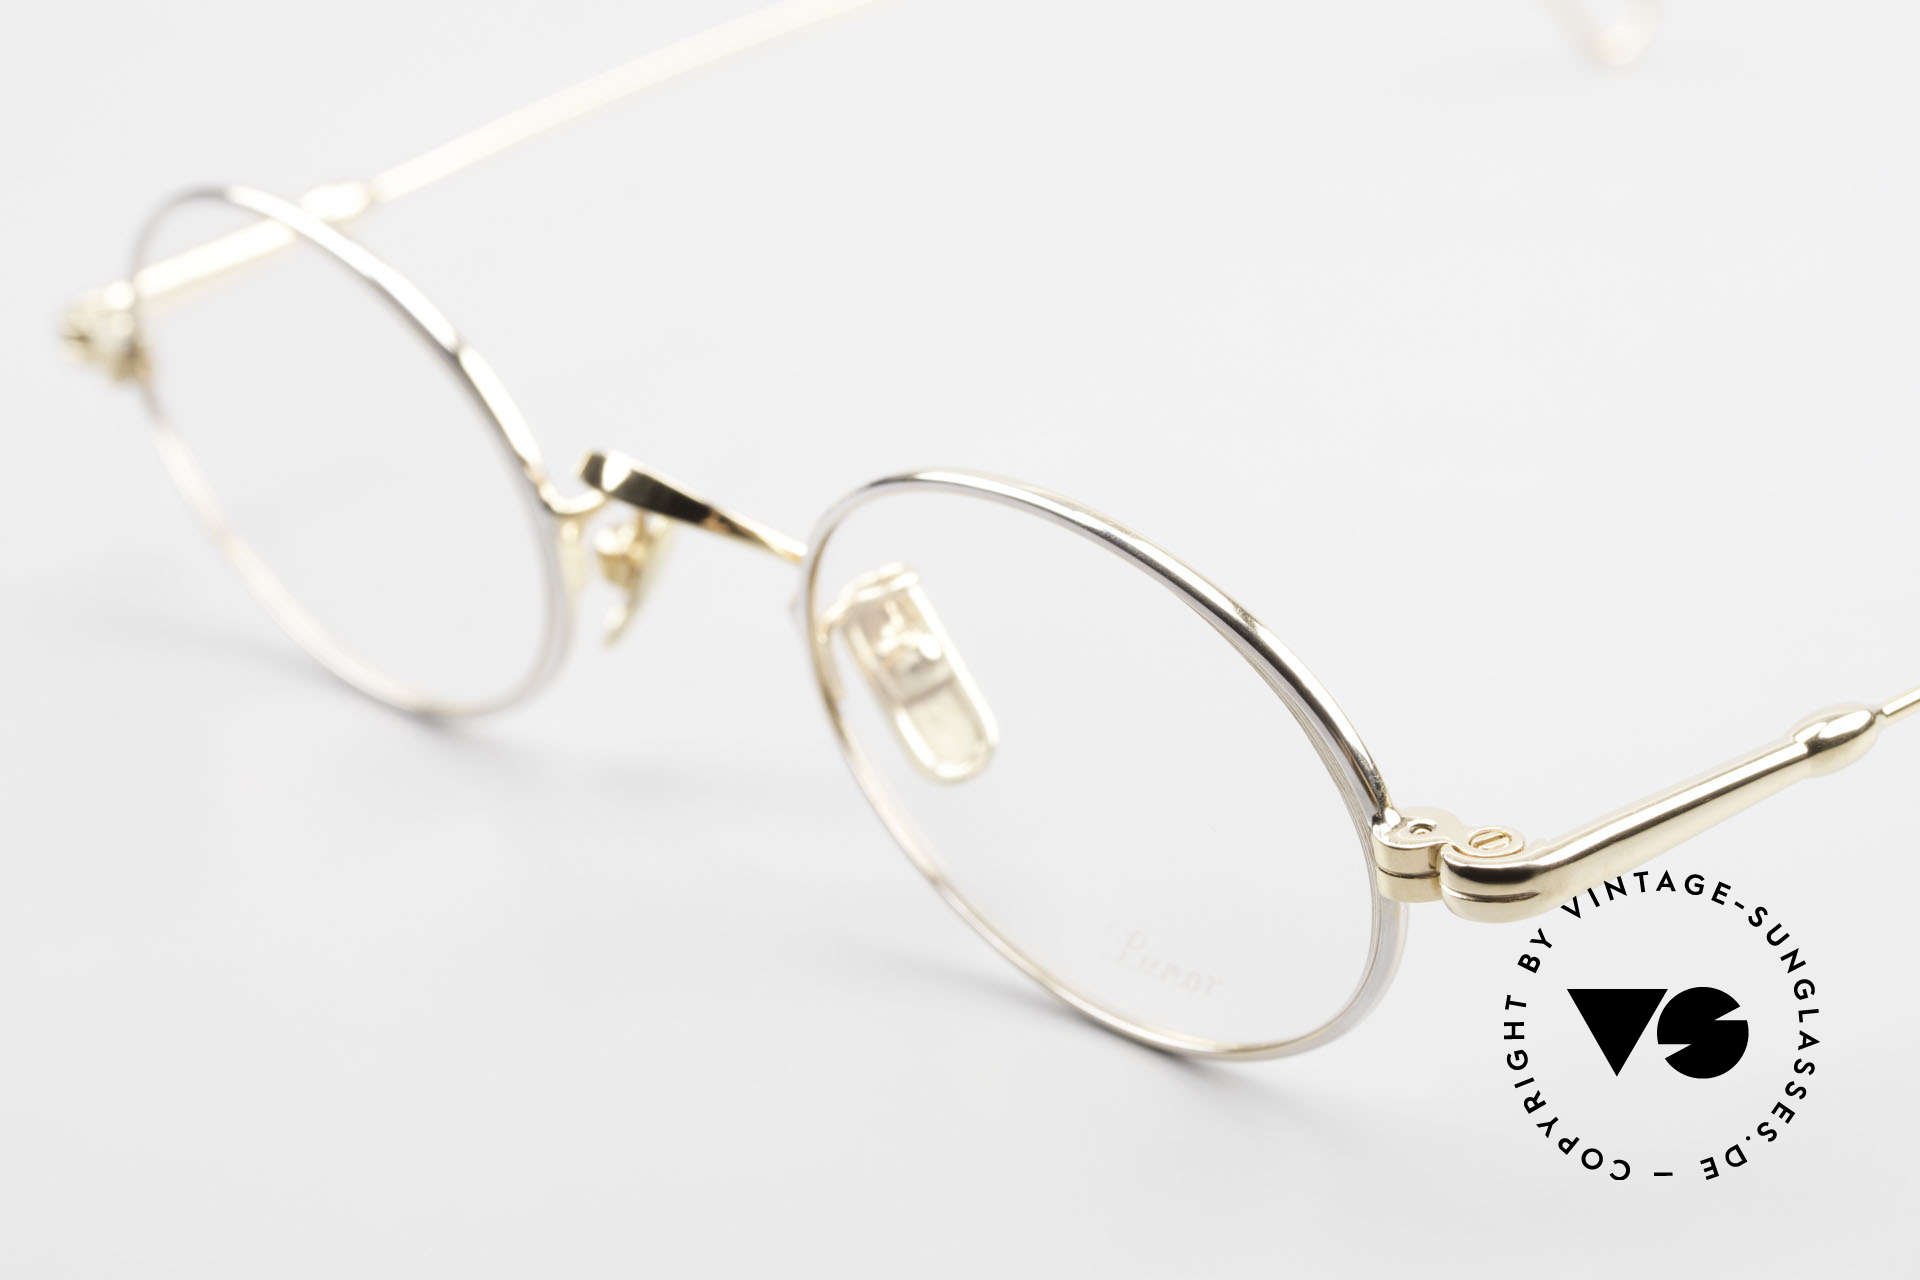 Lunor V 100 Oval Vintage Glasses Bicolor, BICOLOR = PLATINUM plated and 22ct GOLD-PLATED!, Made for Men and Women